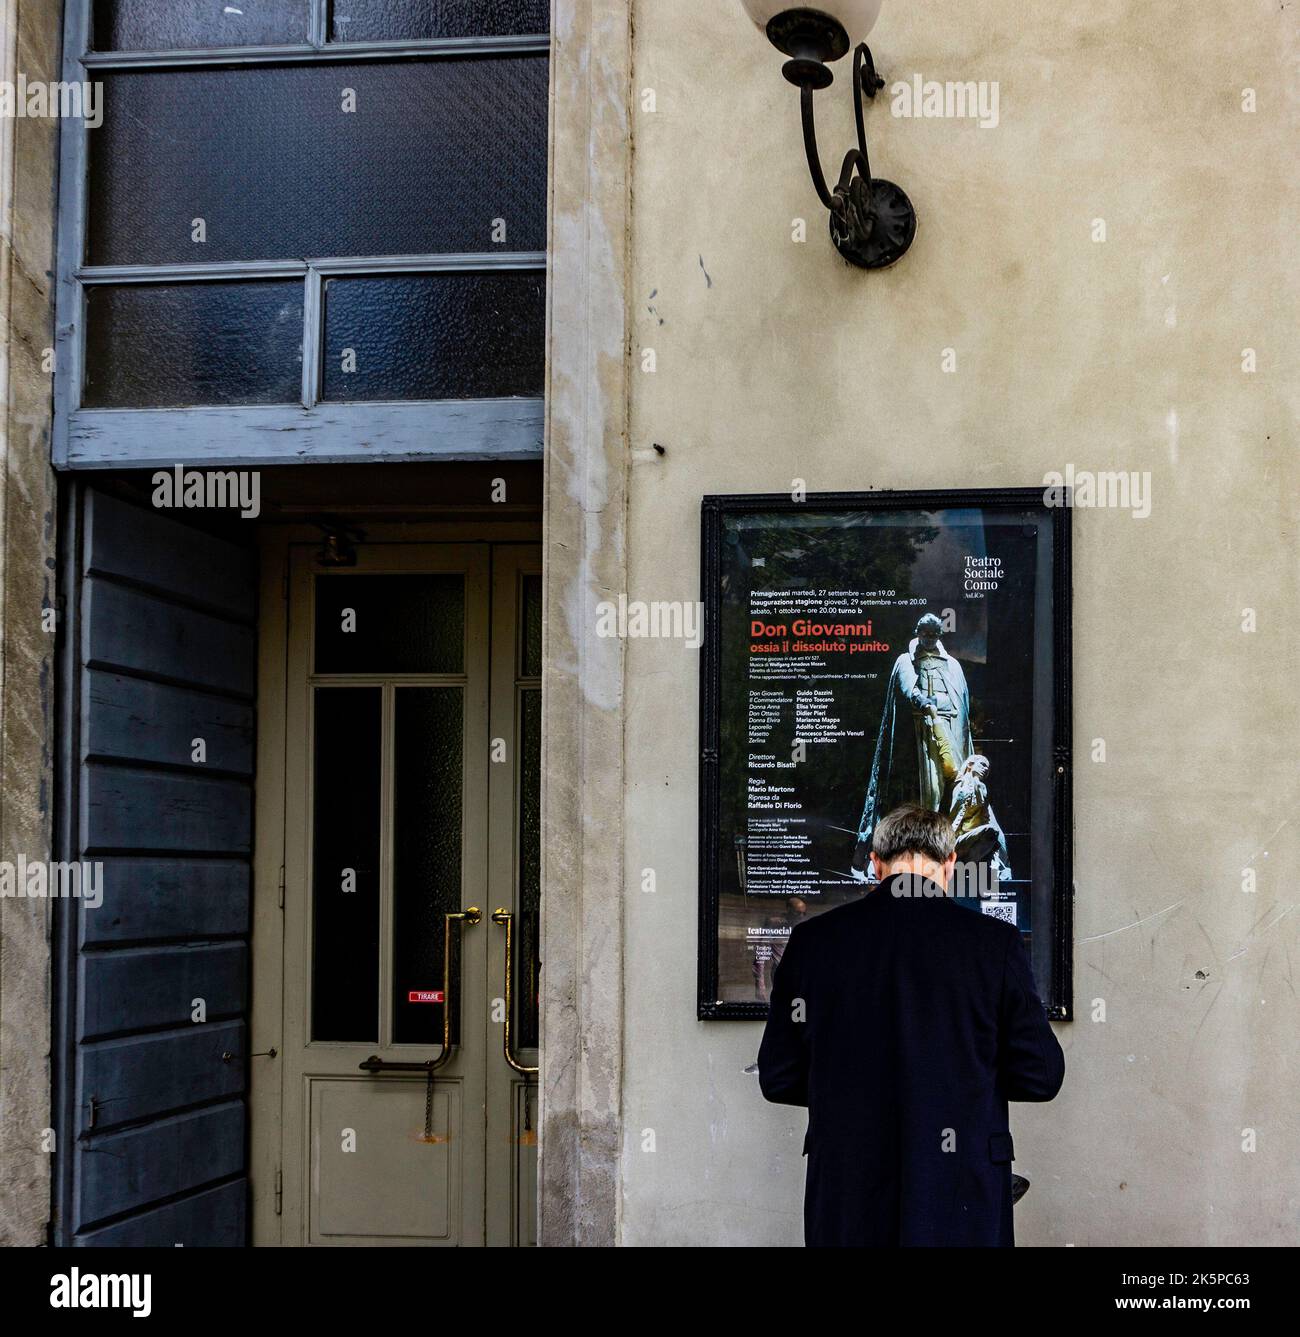 A man standing outside the opera house, Teatro Sociale Como, in Como, Italy. The poster is for a performance of Mozart’s Don Giovanni. Stock Photo